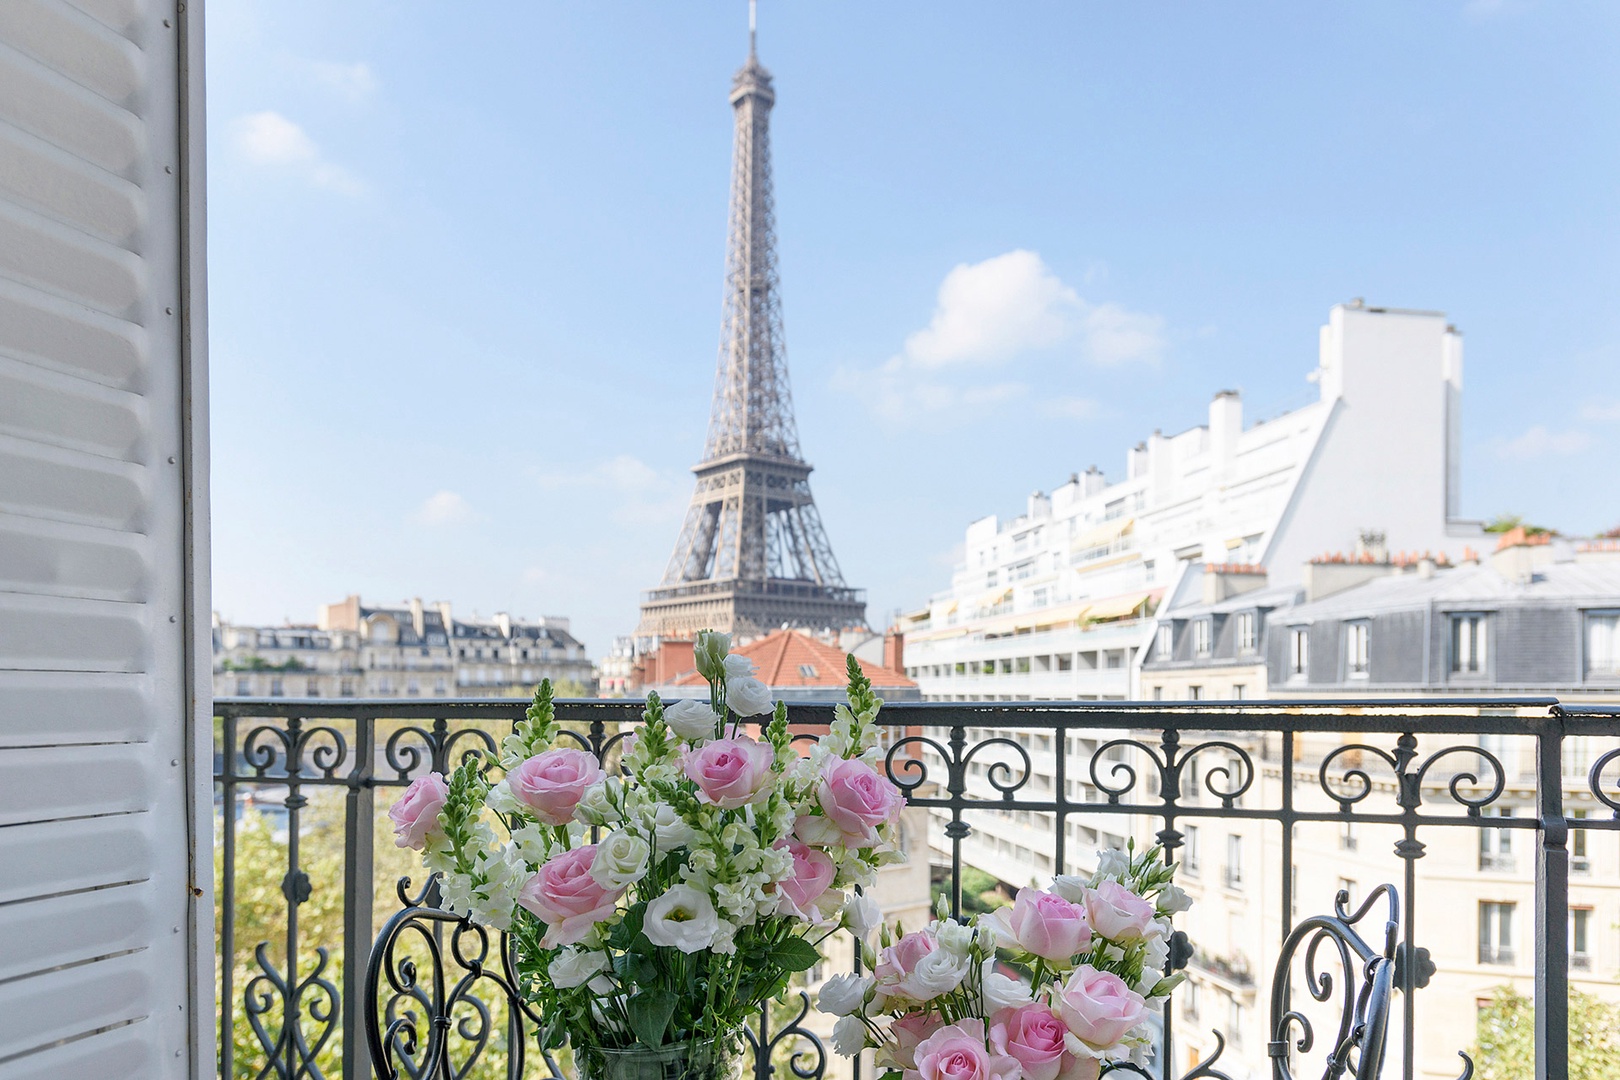 Enjoy your direct view of the Eiffel Tower.